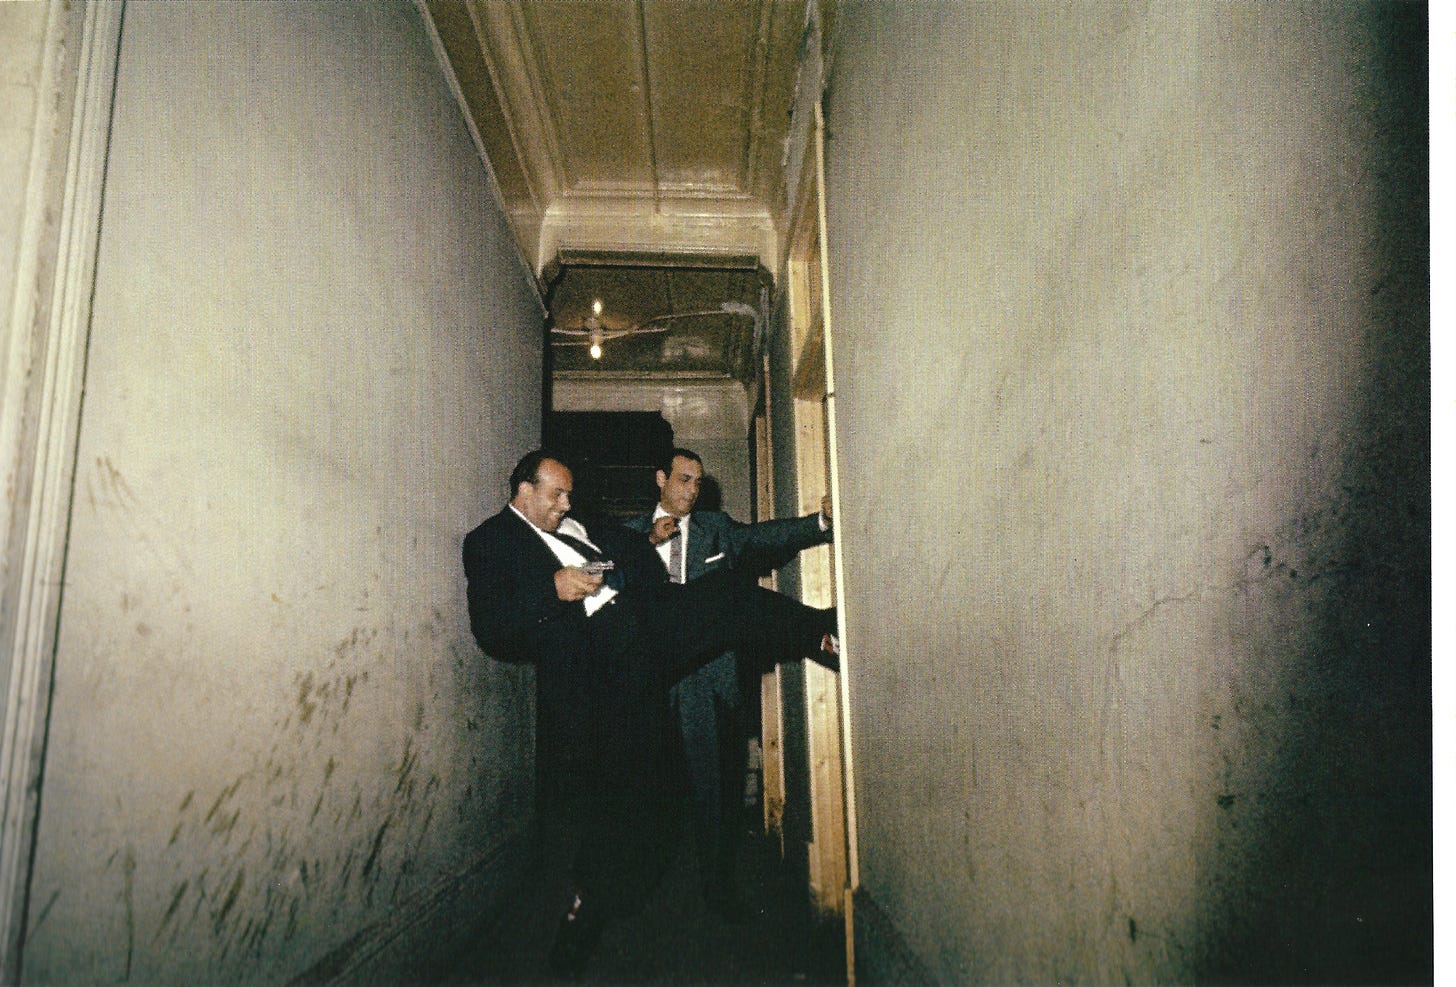 Two detectives, kicking in a door in a shabby hallway